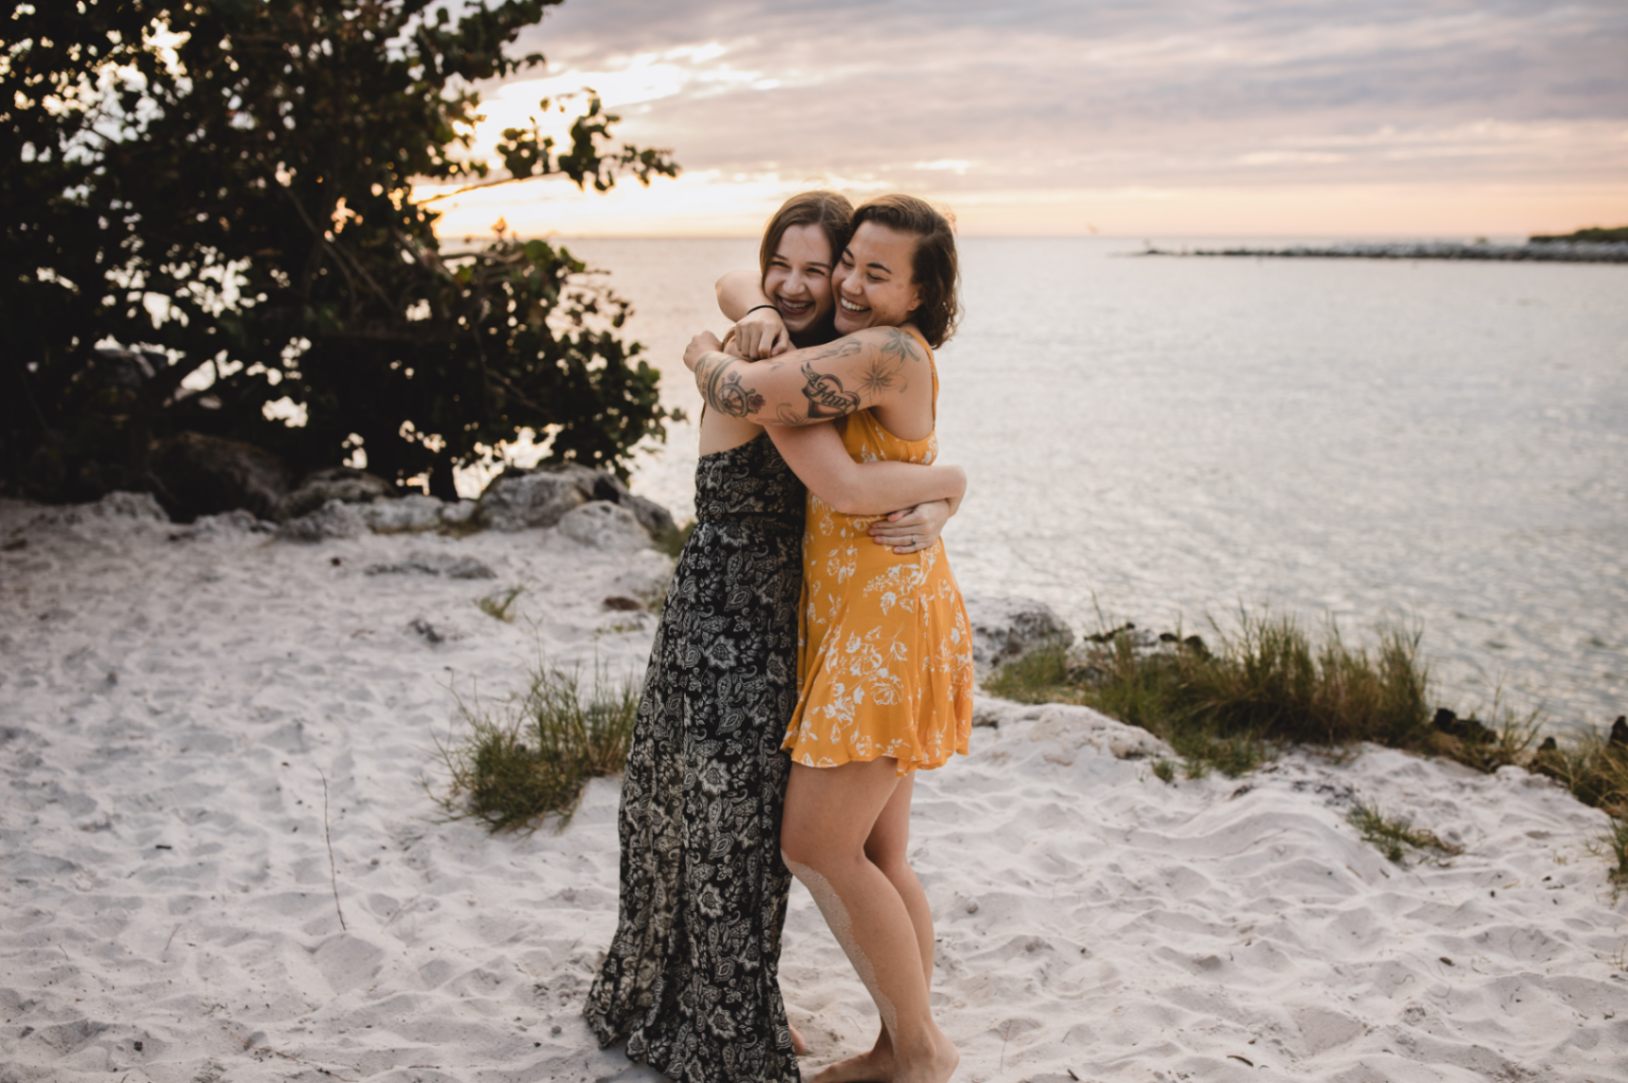 two women in love hug each other on the beach after getting engaged